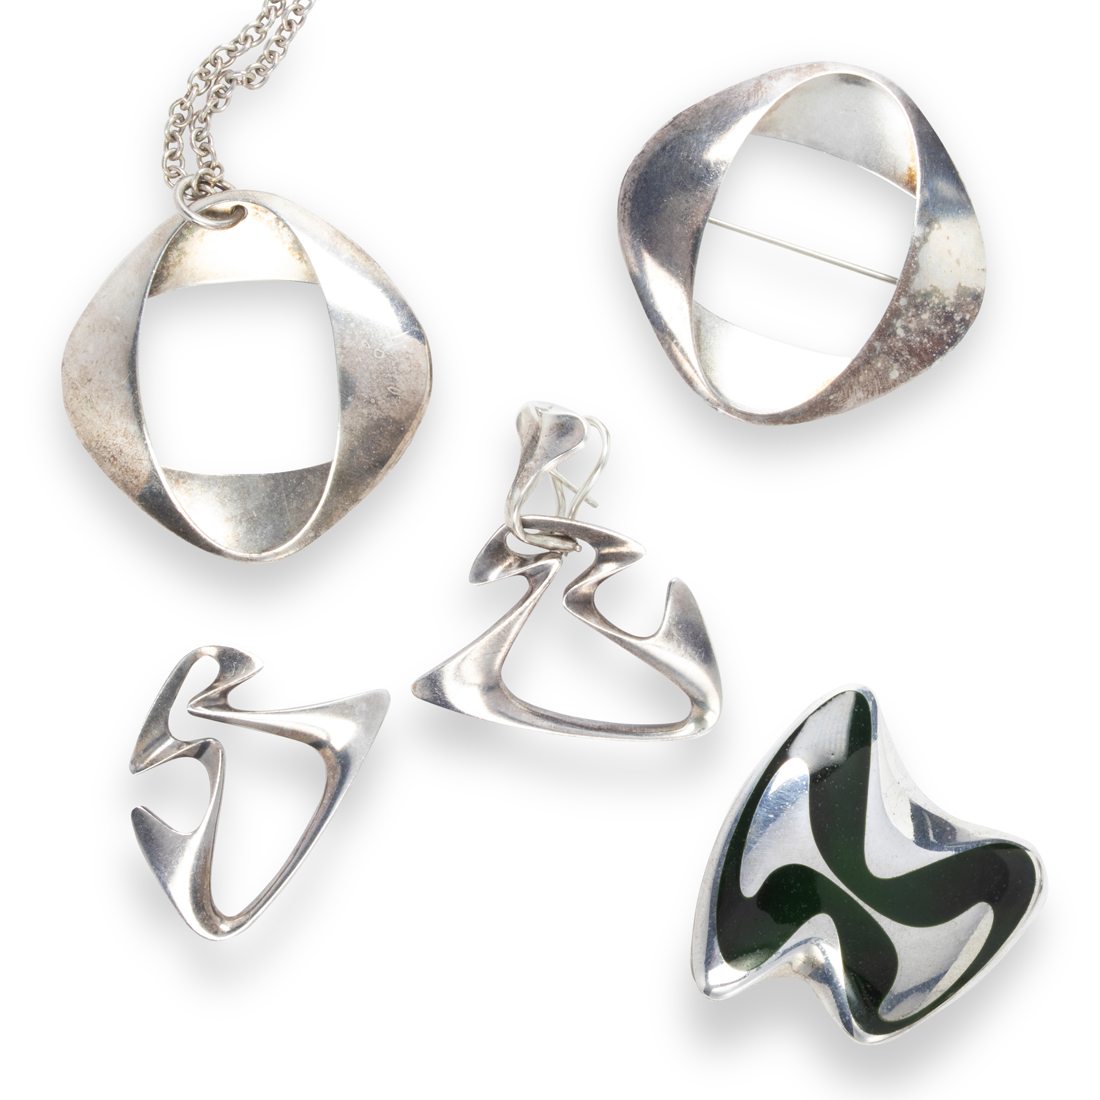 A GROUP OF STERLING SILVER JEWELRY  3a2058